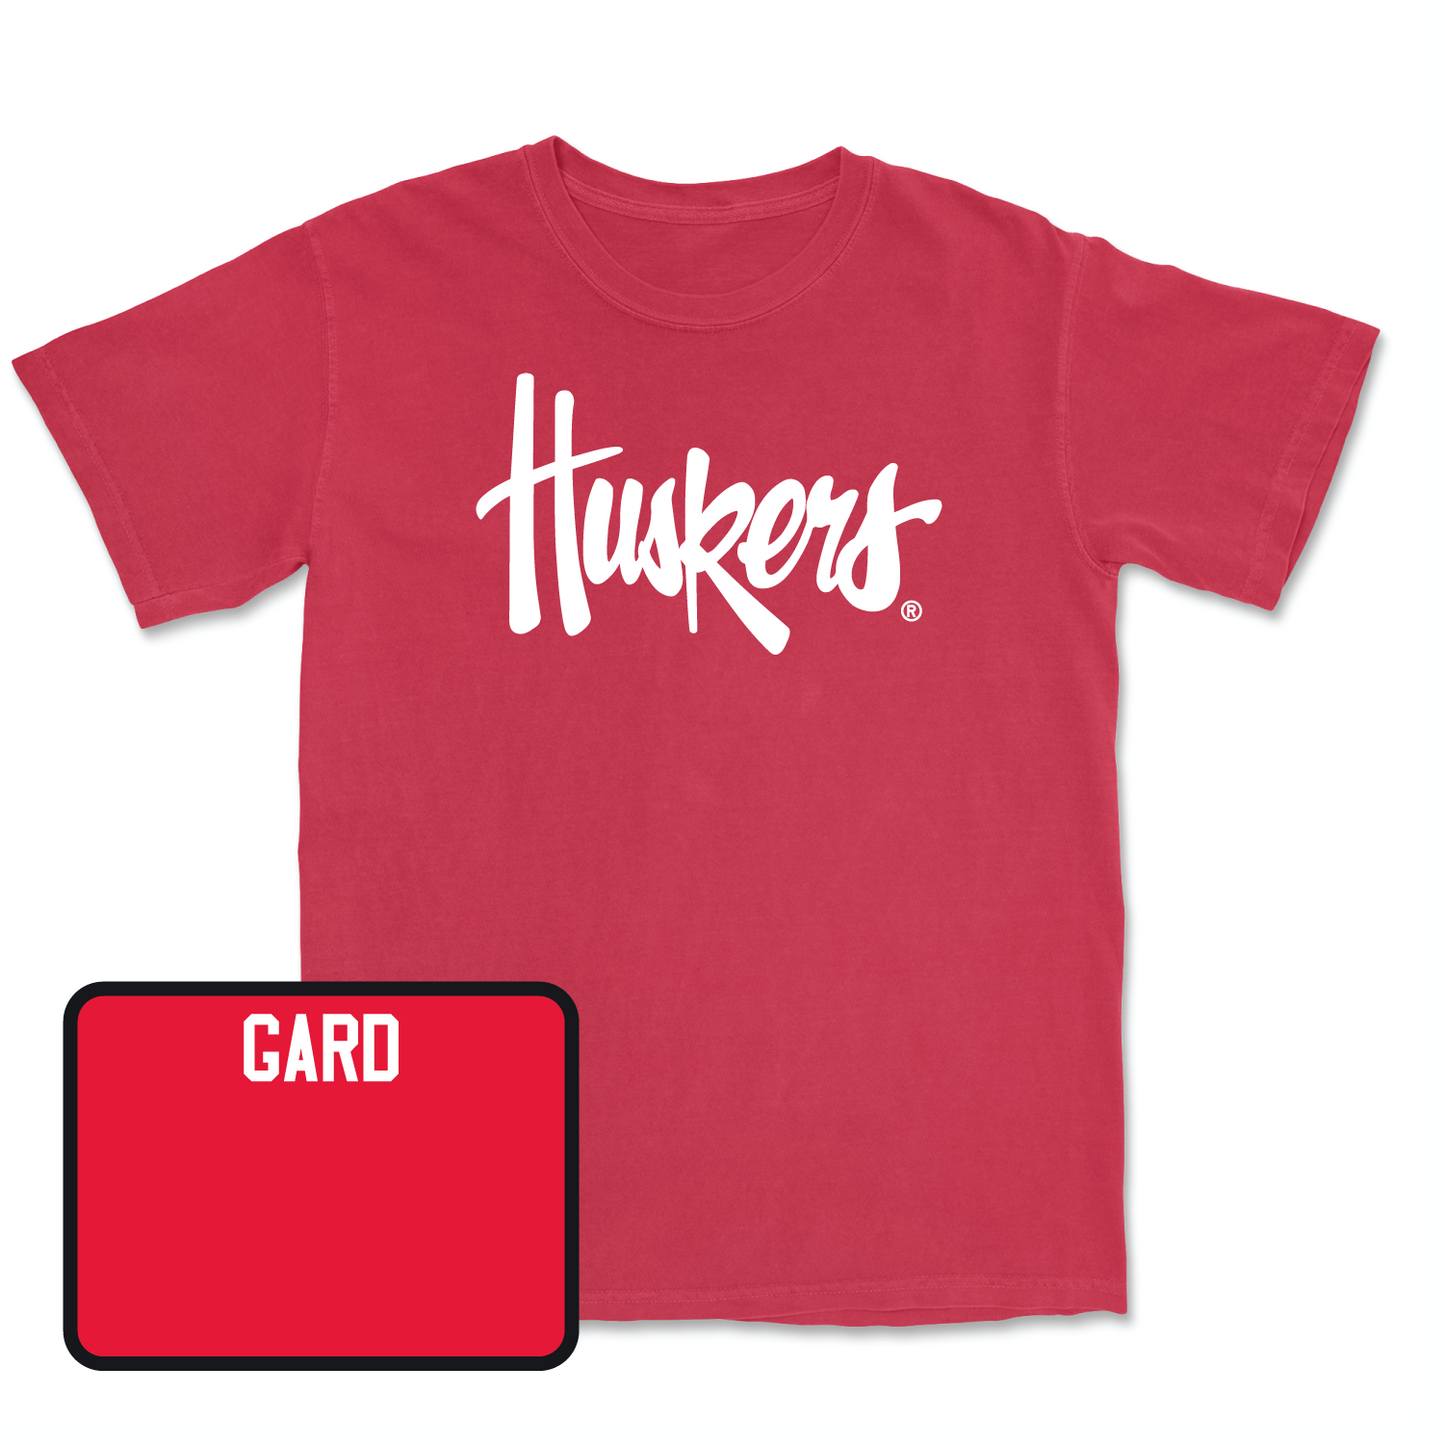 Red Women's Gymnastics Huskers Tee Youth Large / Allie Gard